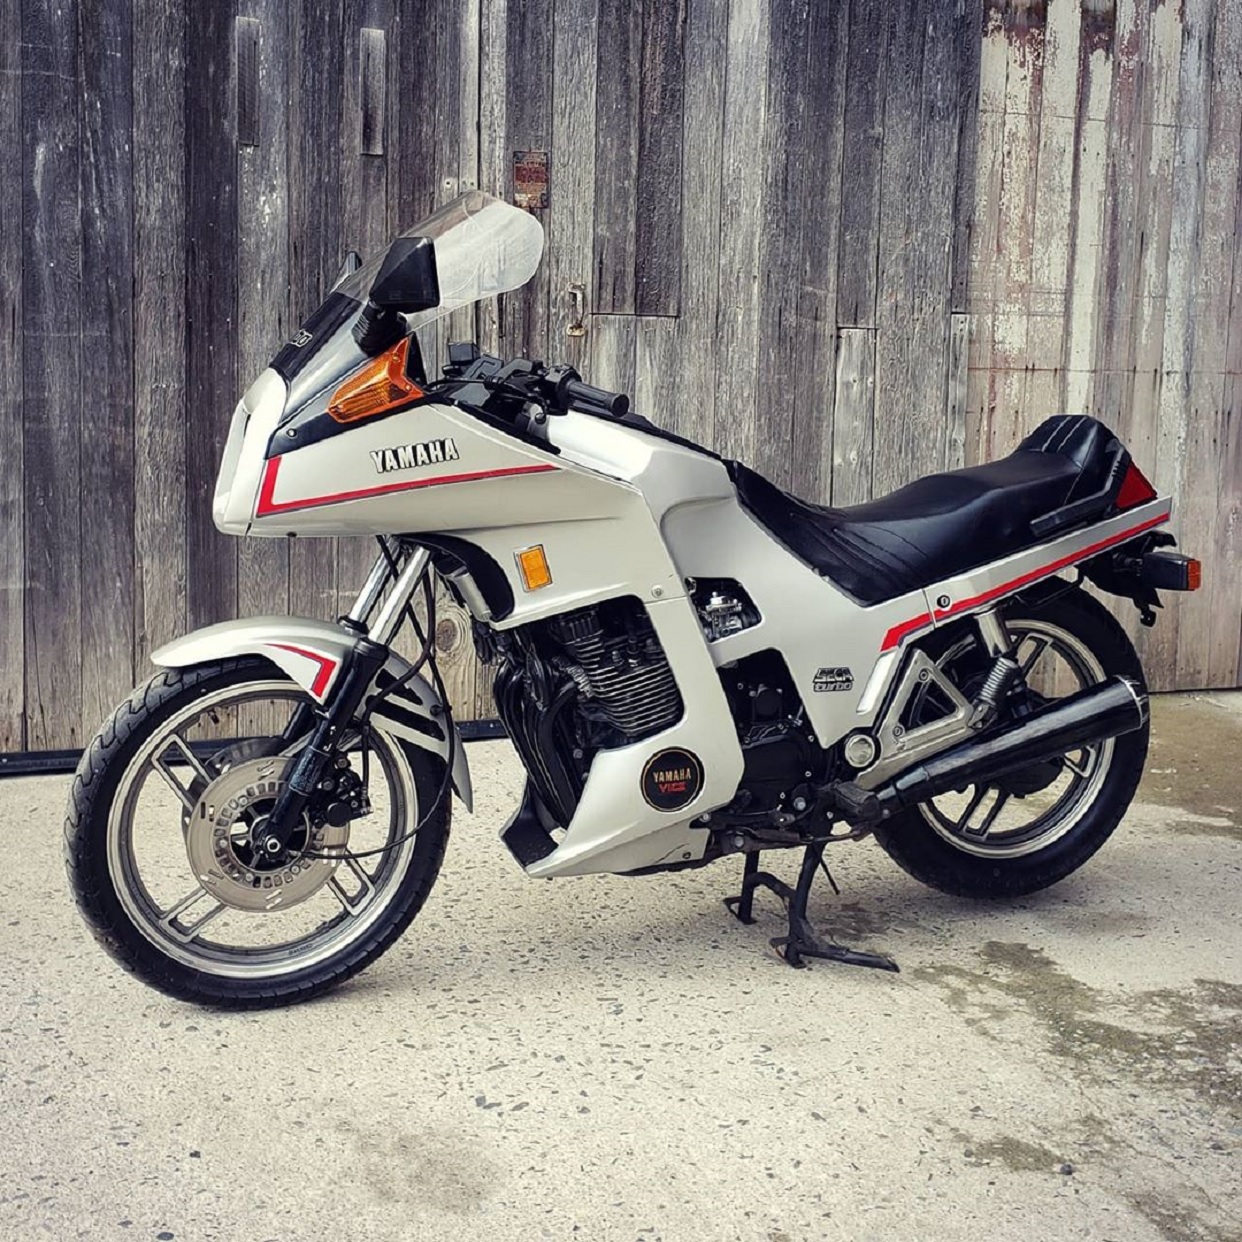 White 1983 Yamaha XJ650 Seca Turbo in front of a fence